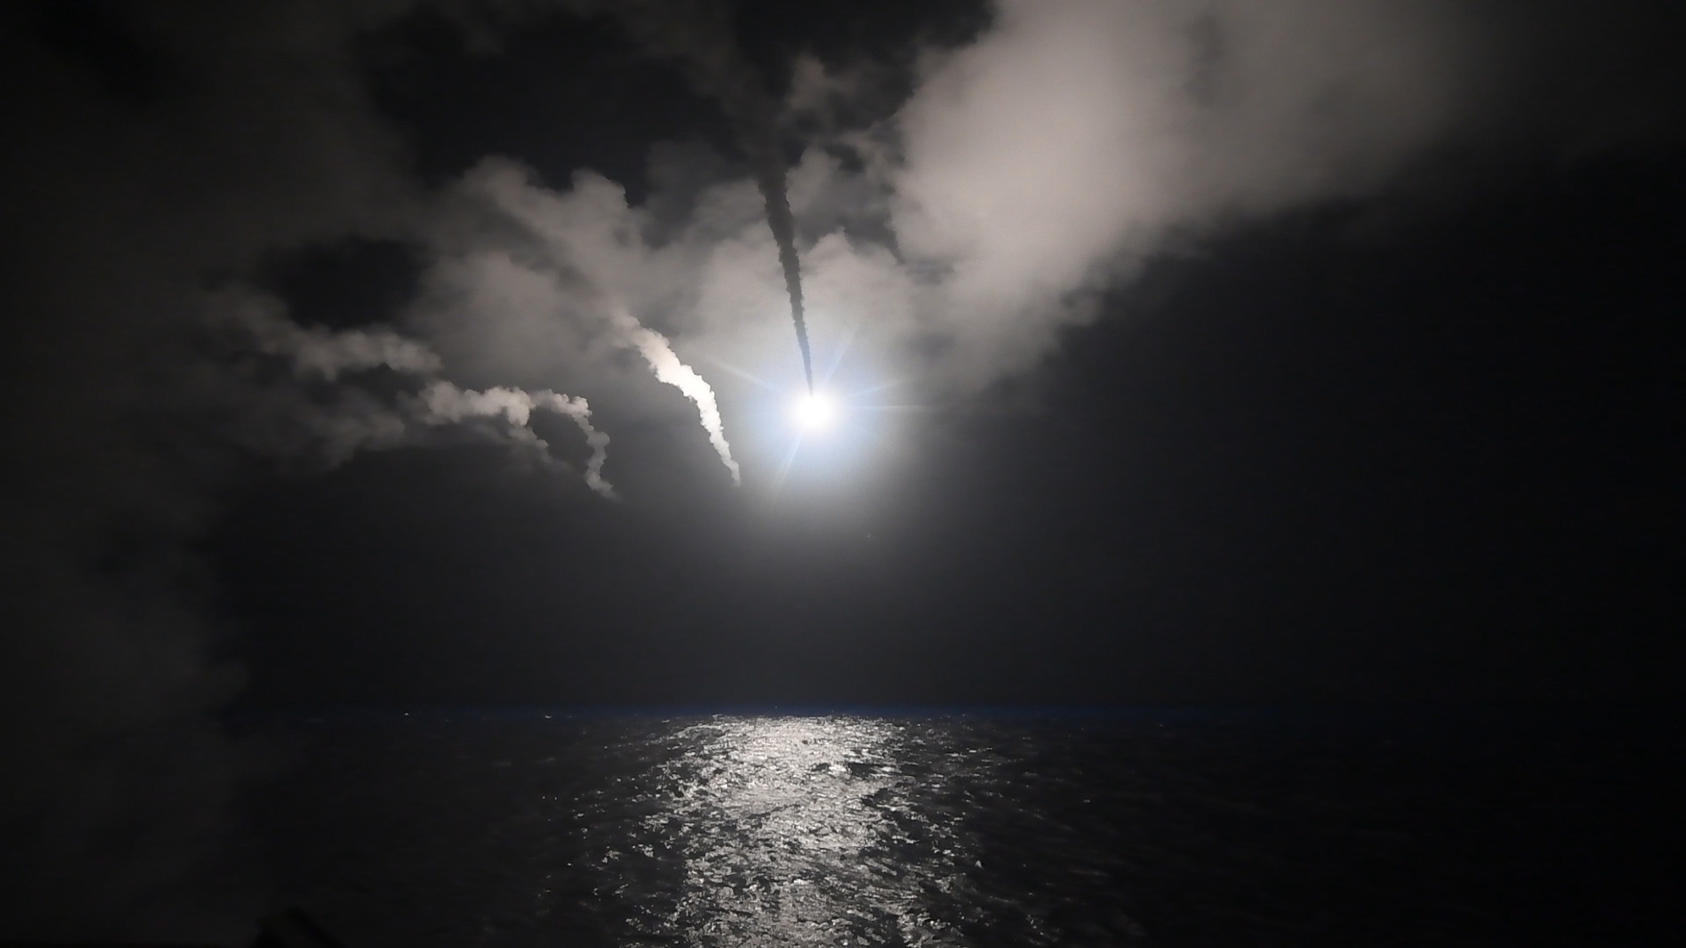 The guided-missile destroyer USS Porter (DDG 78) conducts strike operations while in the Mediterranean Sea, April 7, 2017.